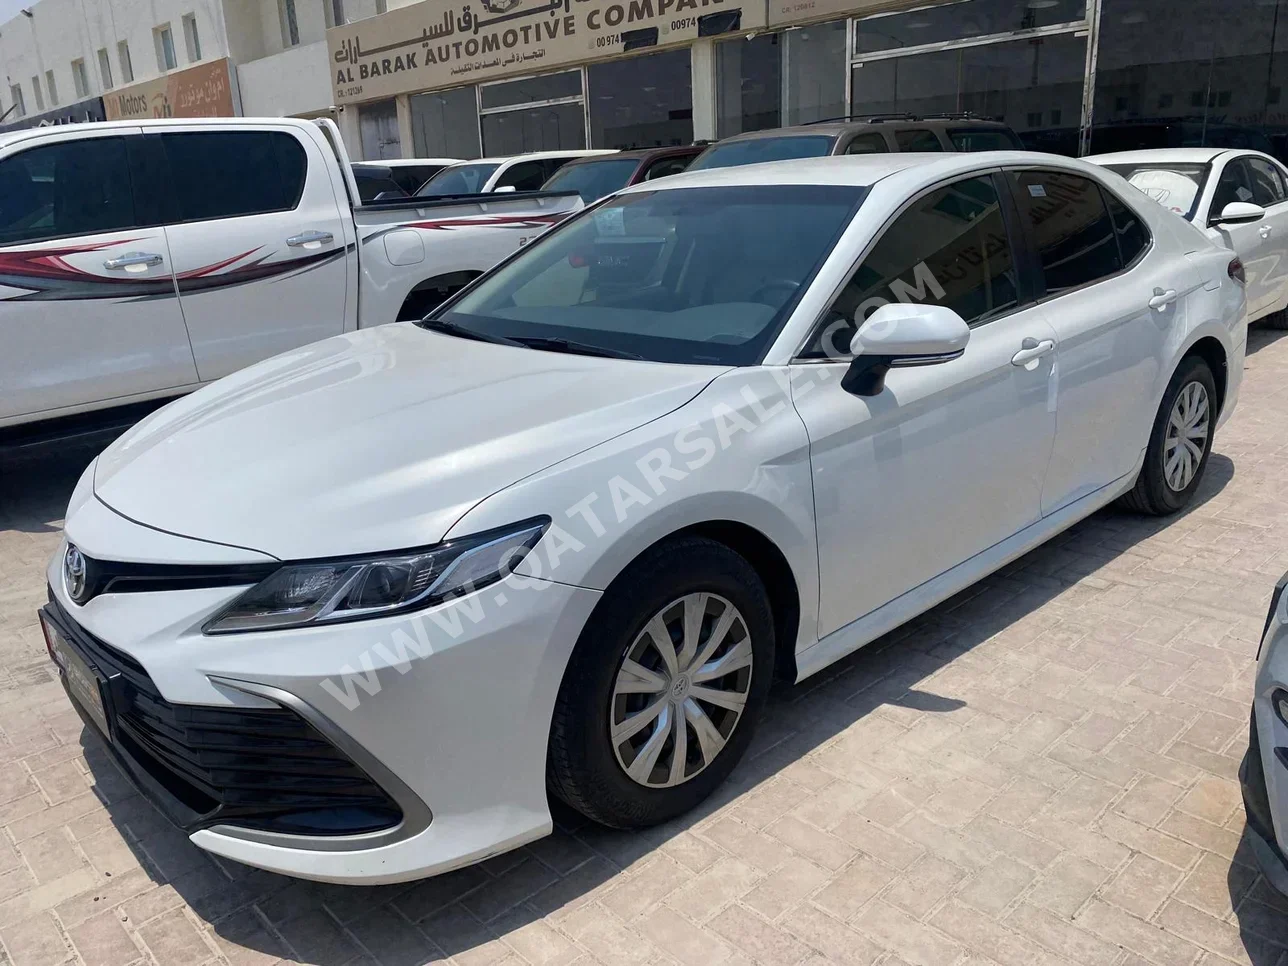 Toyota  Camry  LE  2021  Automatic  64,000 Km  4 Cylinder  Front Wheel Drive (FWD)  Sedan  White